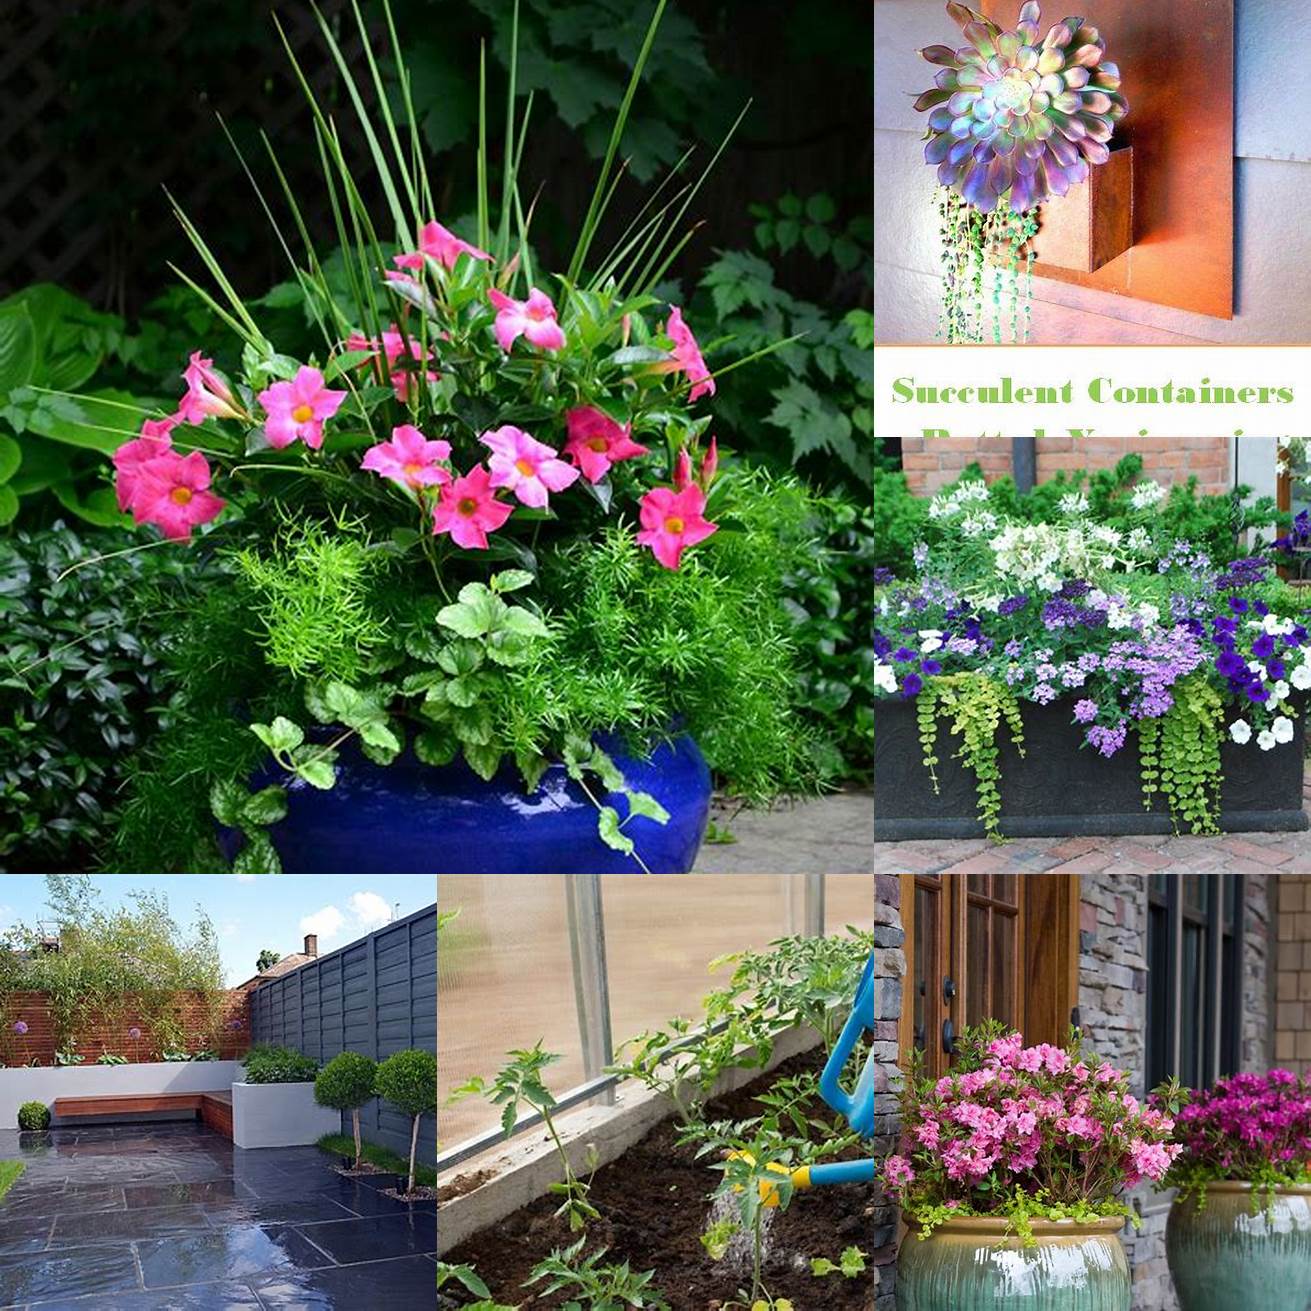 5 Maintenance Some containers require more maintenance than others so make sure to choose one that fits your lifestyle and gardening abilities